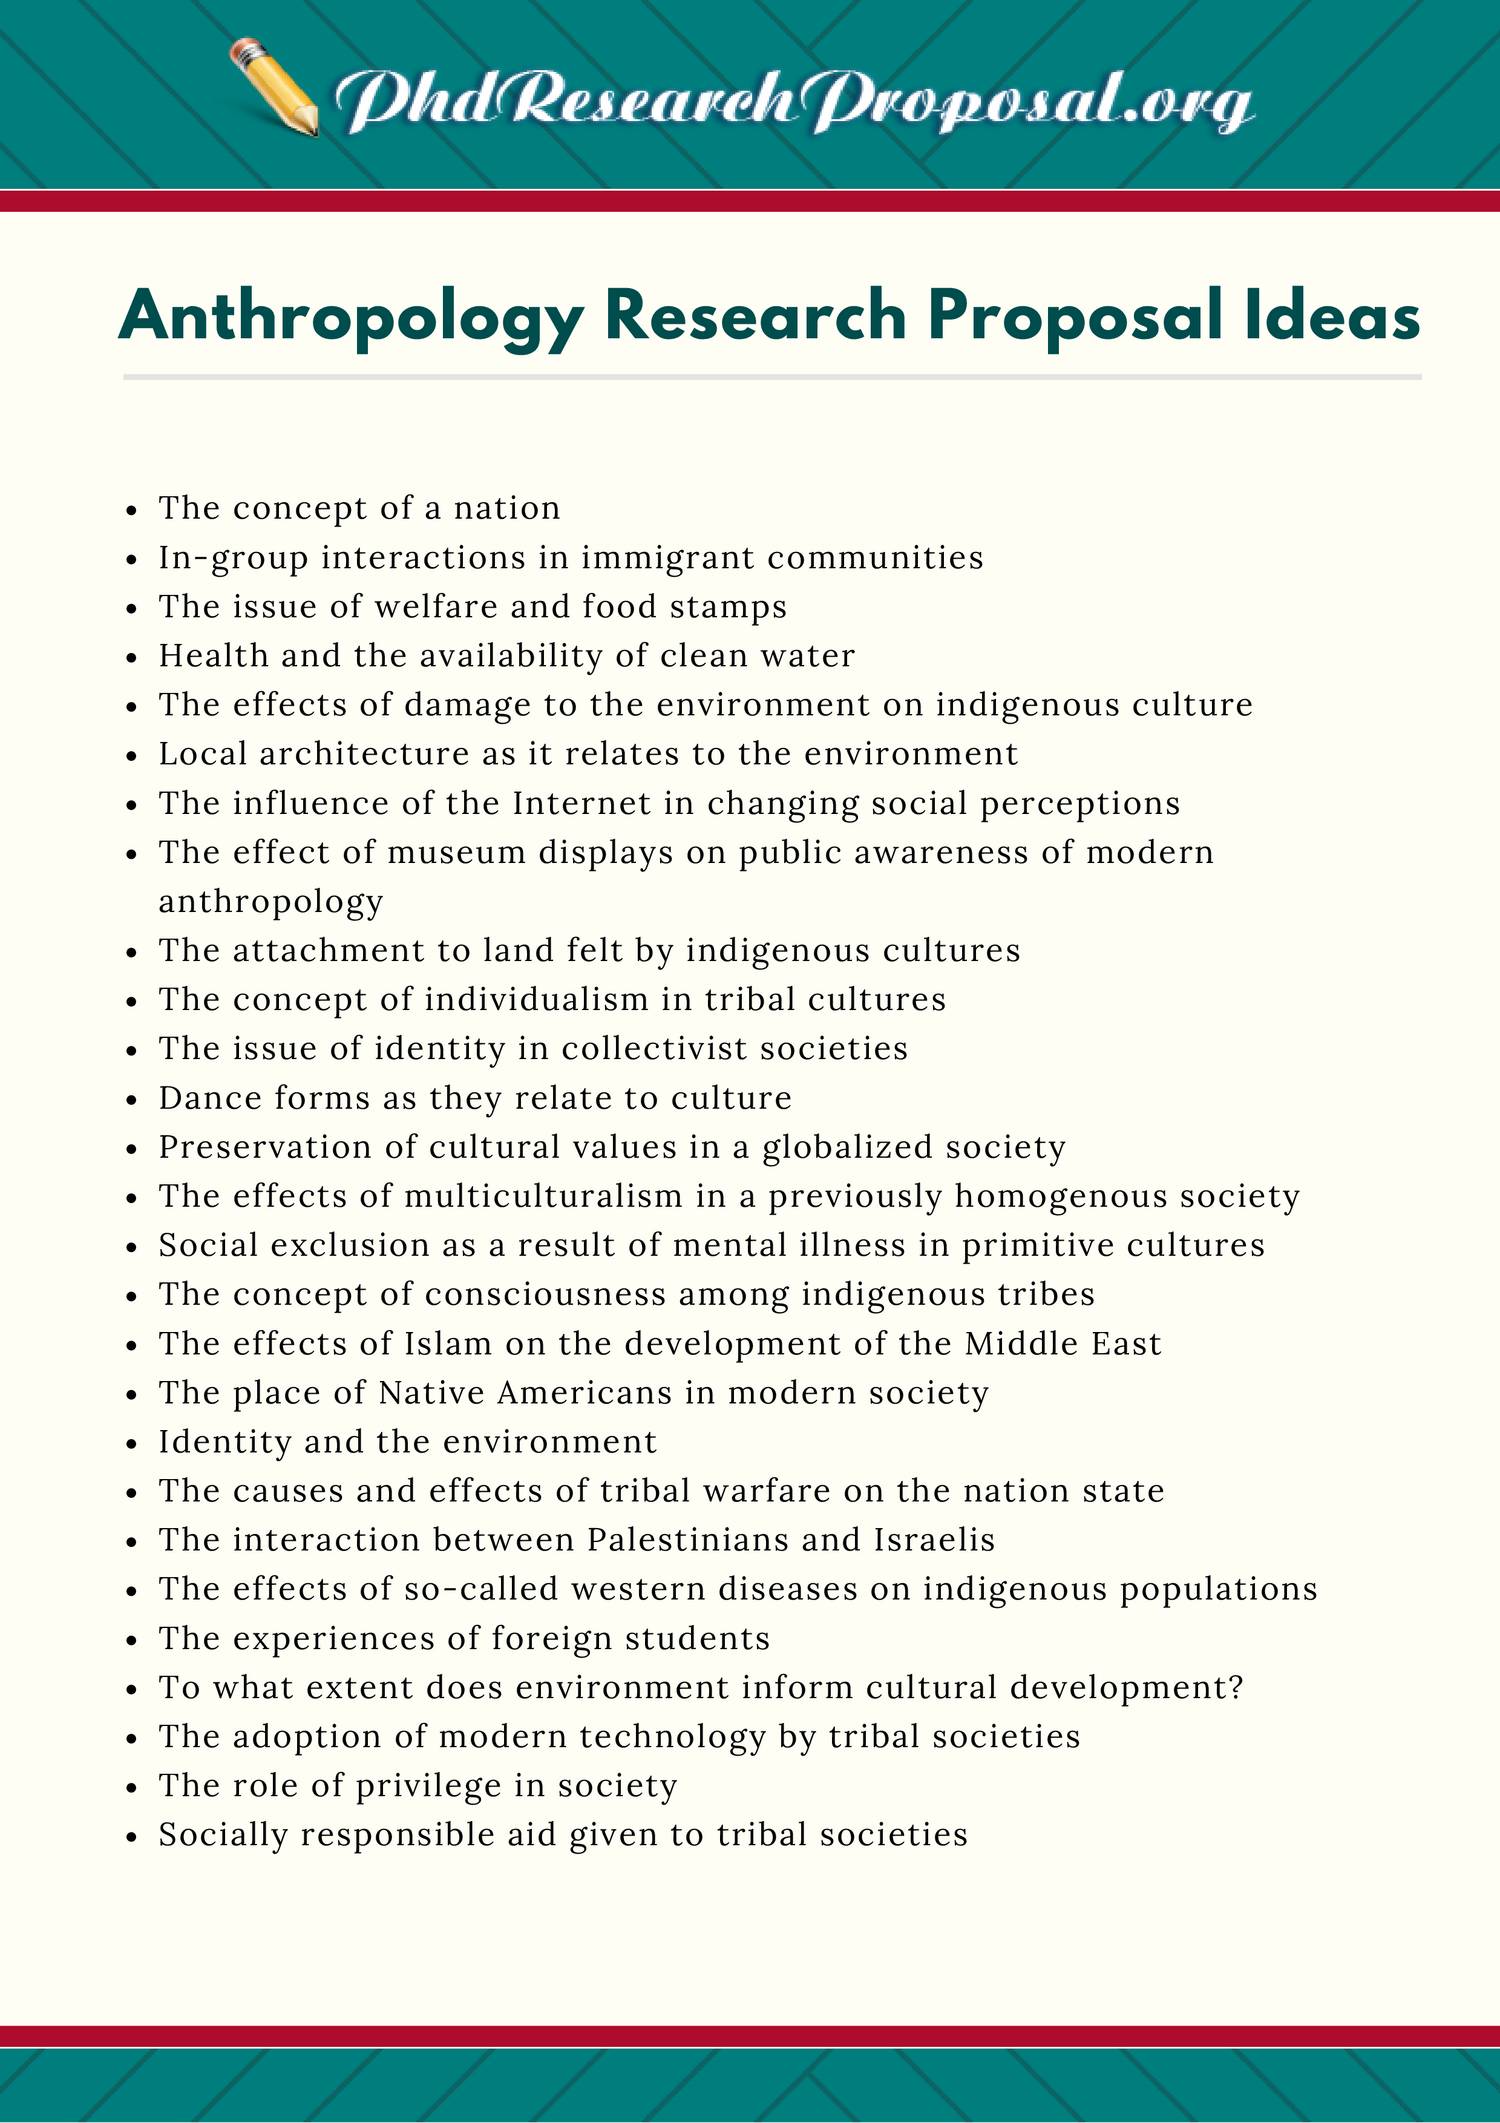 topics for anthropology research paper